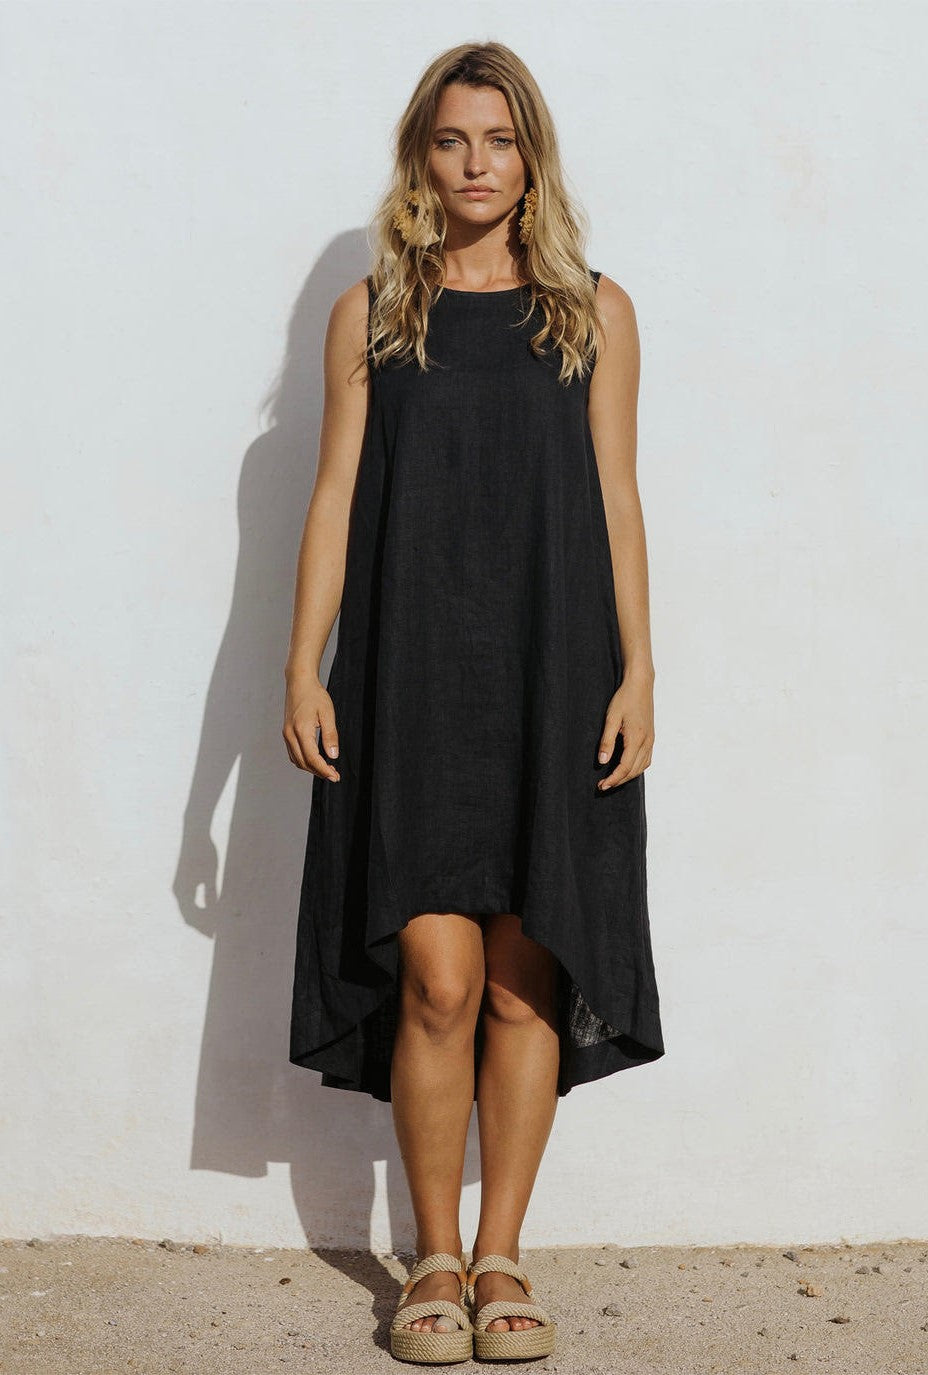 Toscana black linen women's dress is flowy and free-fitted, made with high-quality European linen, breathable and lightweight, perfect clothing for hot and humid weather. Simple and stylish women's black linen dress will be part of your capsule wardrobe, shop women linen dresses online in Hong Kong and Singapore.